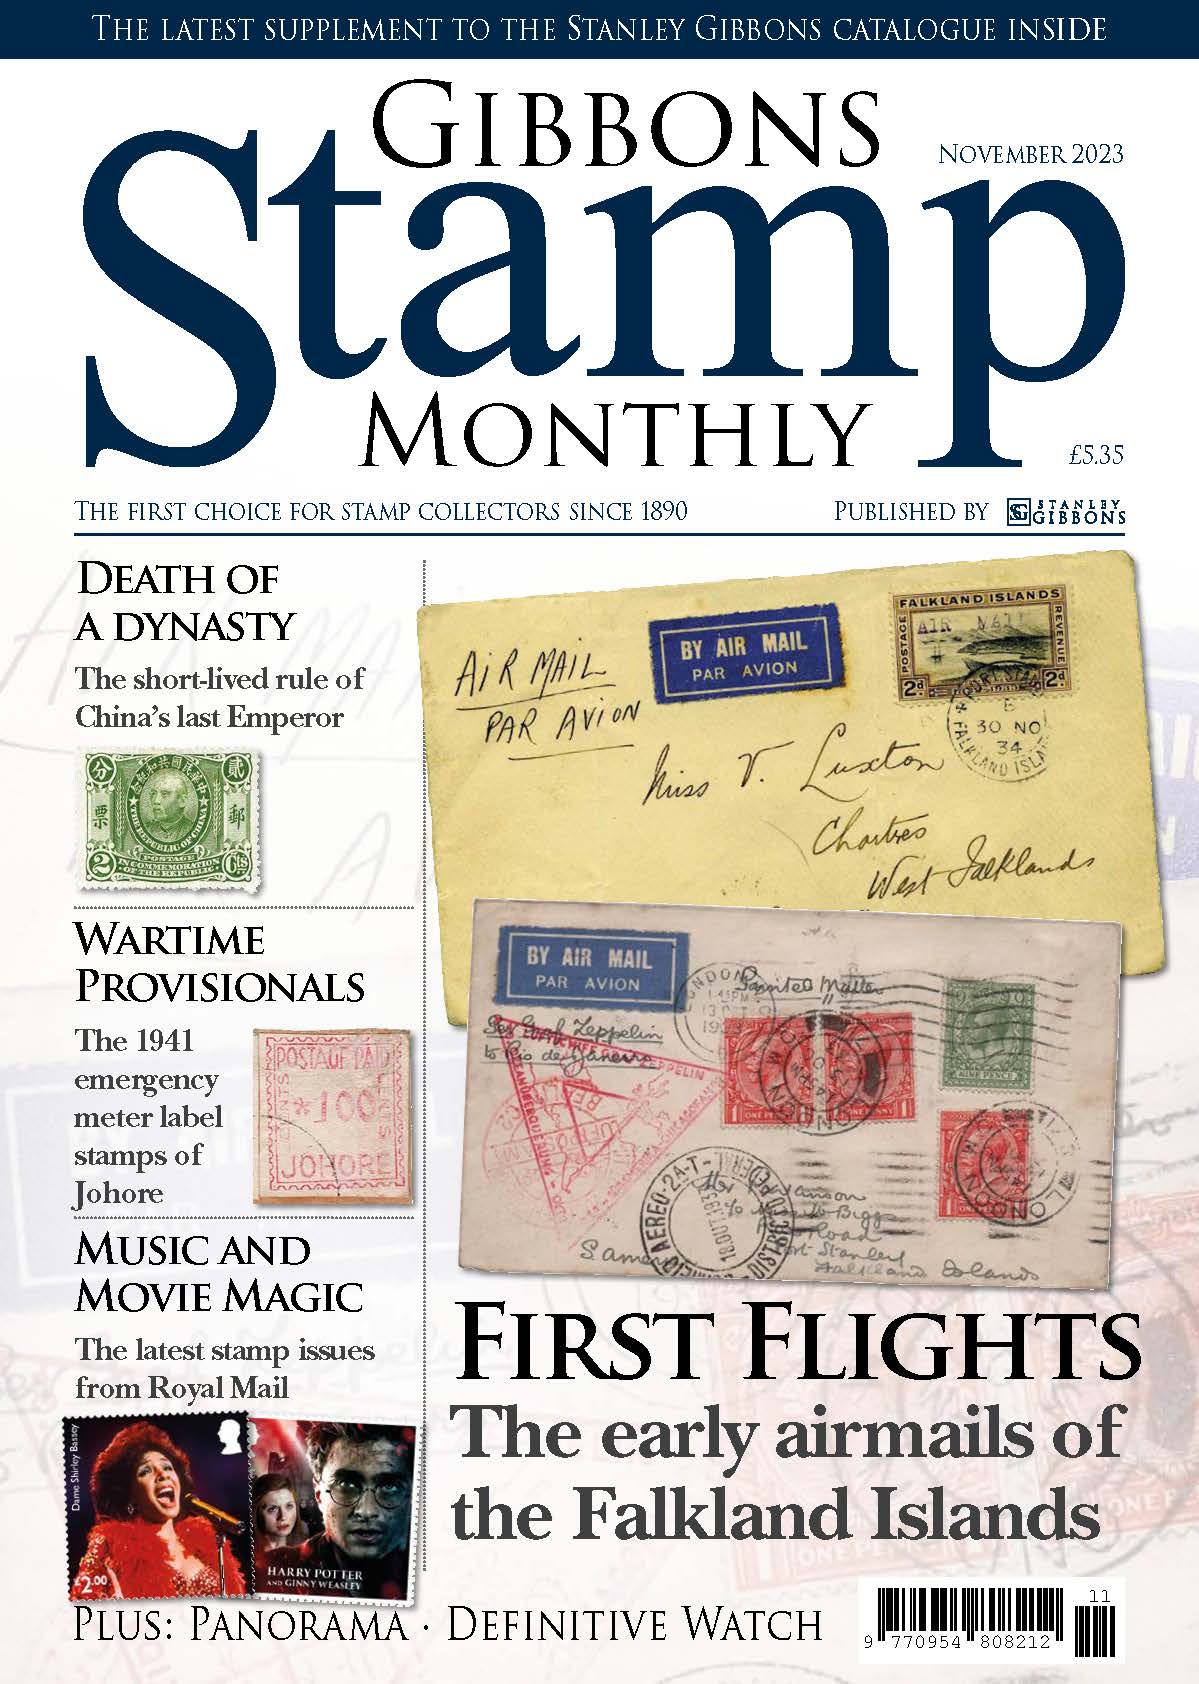 The Stanley Gibbons Book of Stamps & Stamp Collecting - books & magazines -  by owner - sale - craigslist